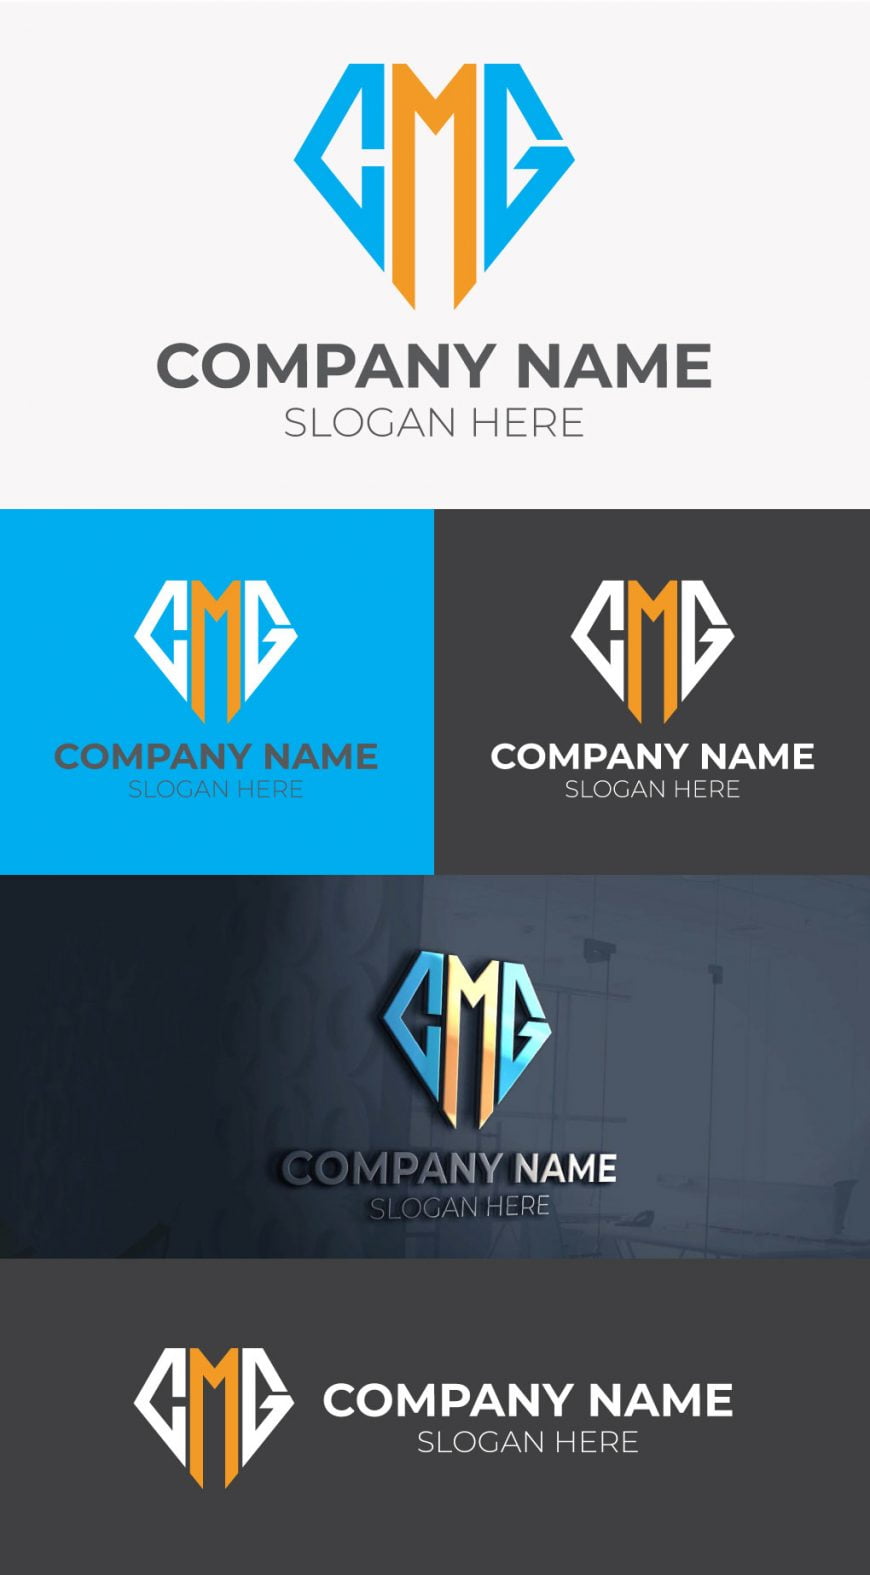 CMG-LETTER-LOGO-FREE-TEMPLATE